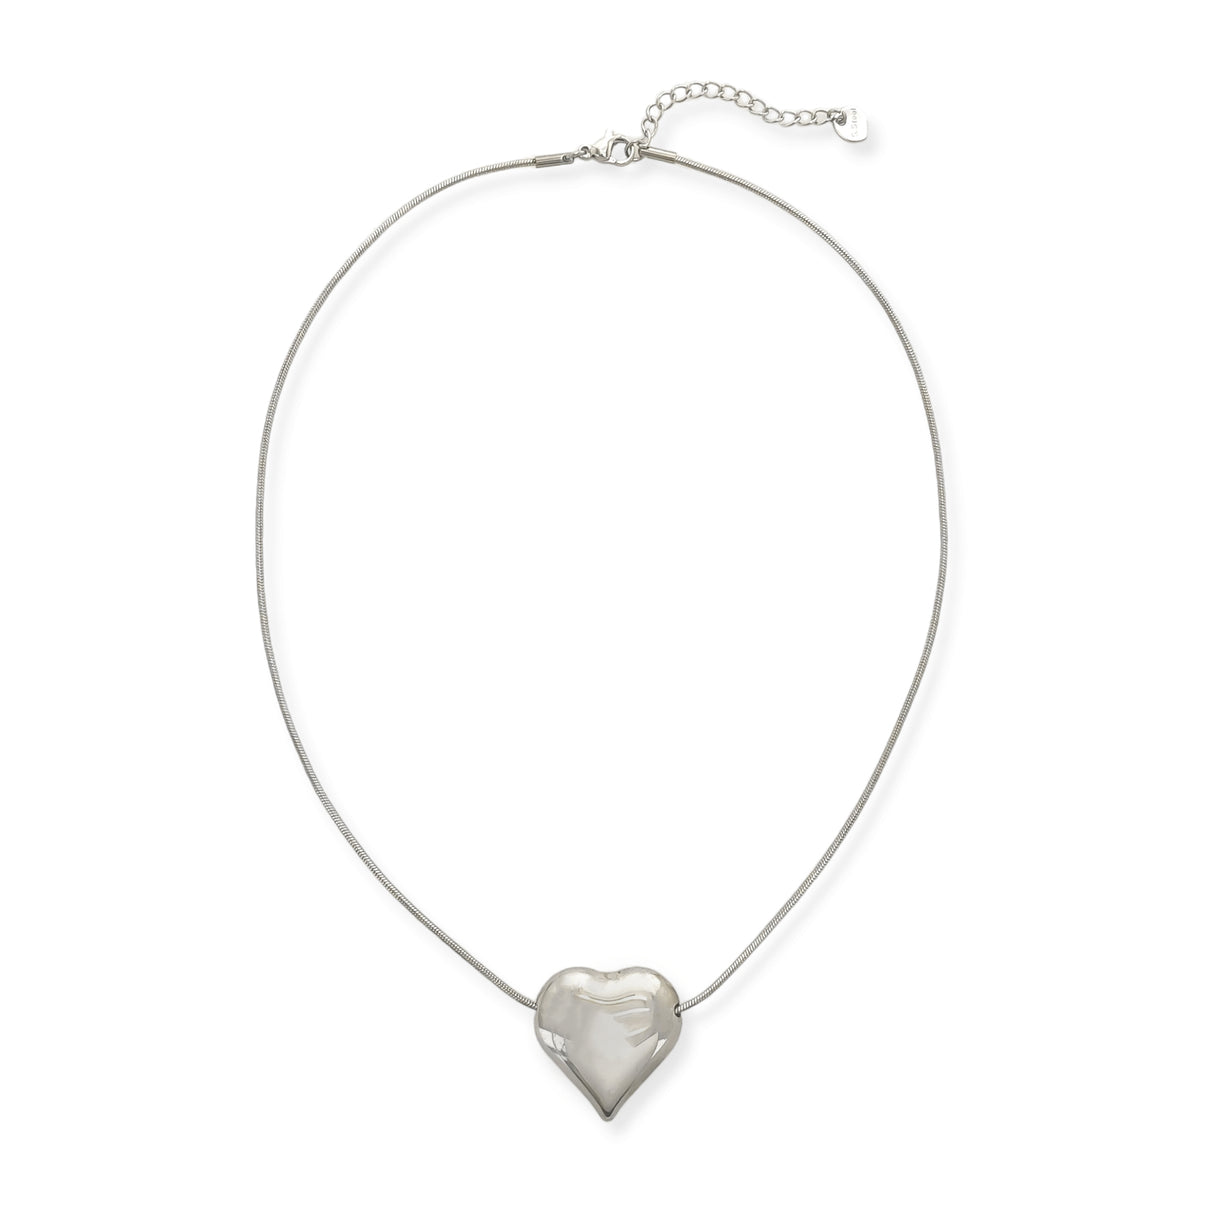 SILVER PUFF HEART NECKLACE